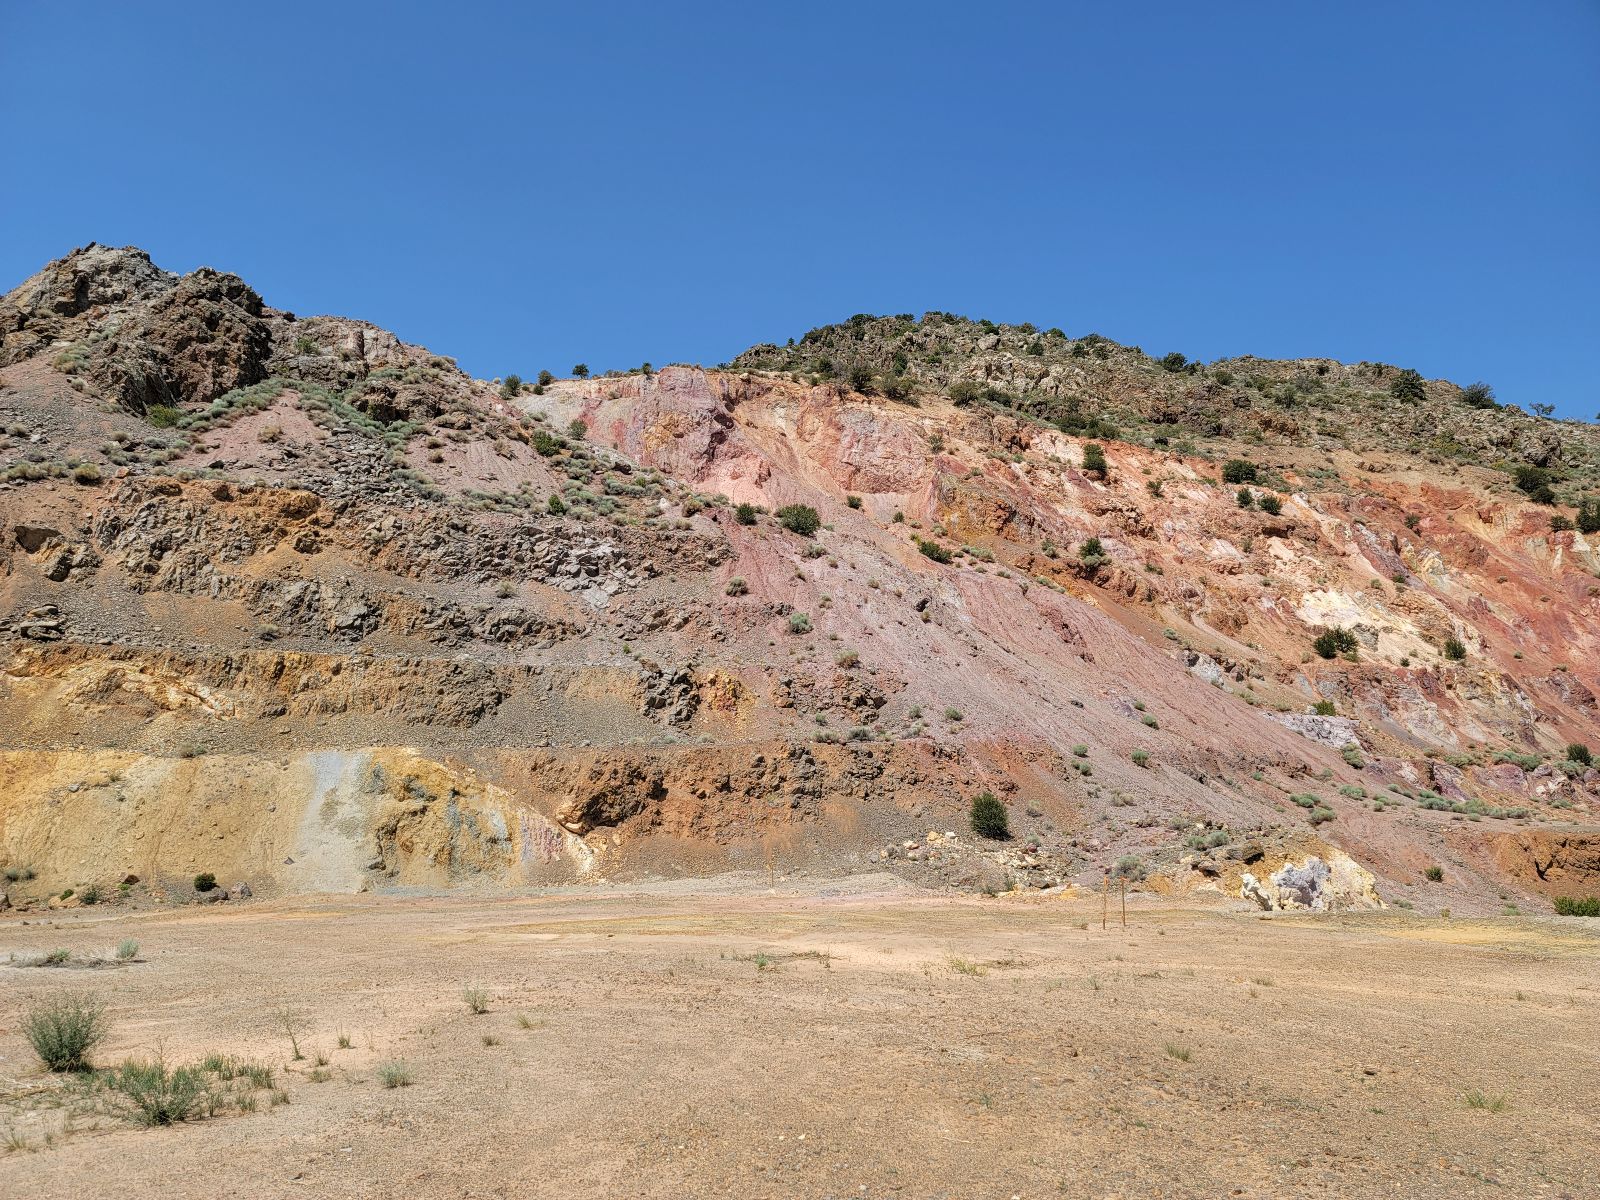 Exiting Open Pit